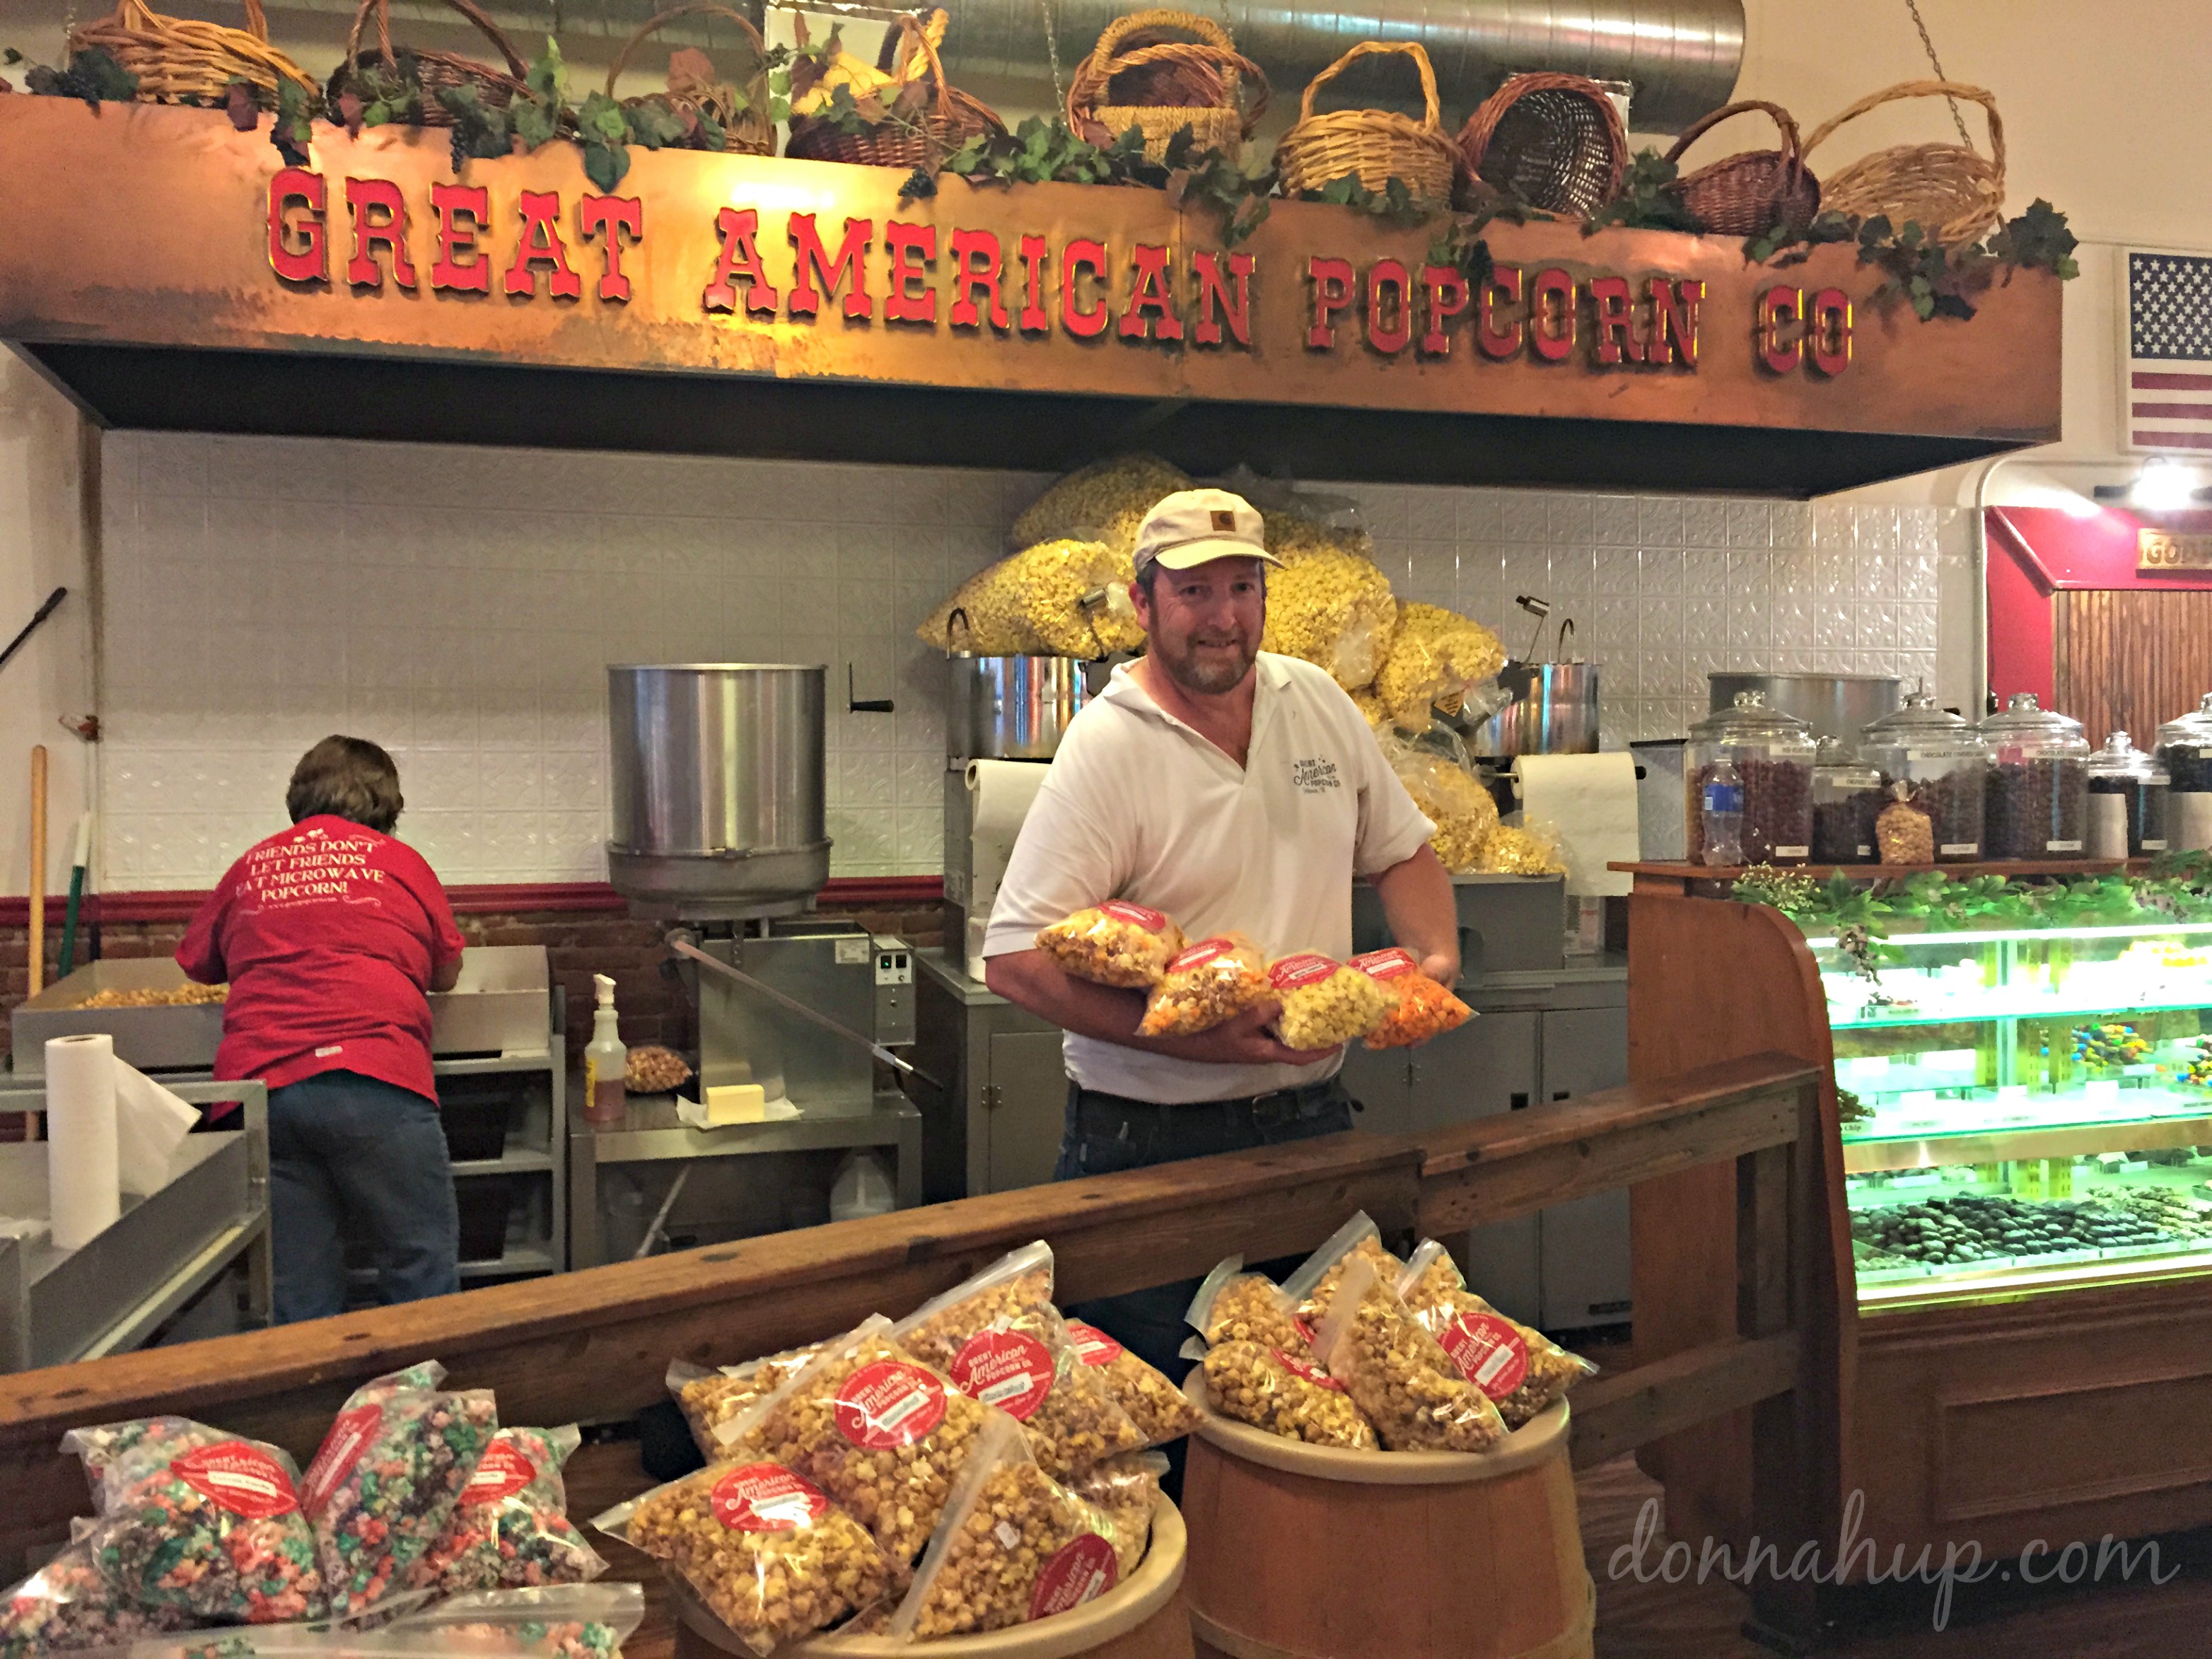 The Great American Popcorn Co. in Galena